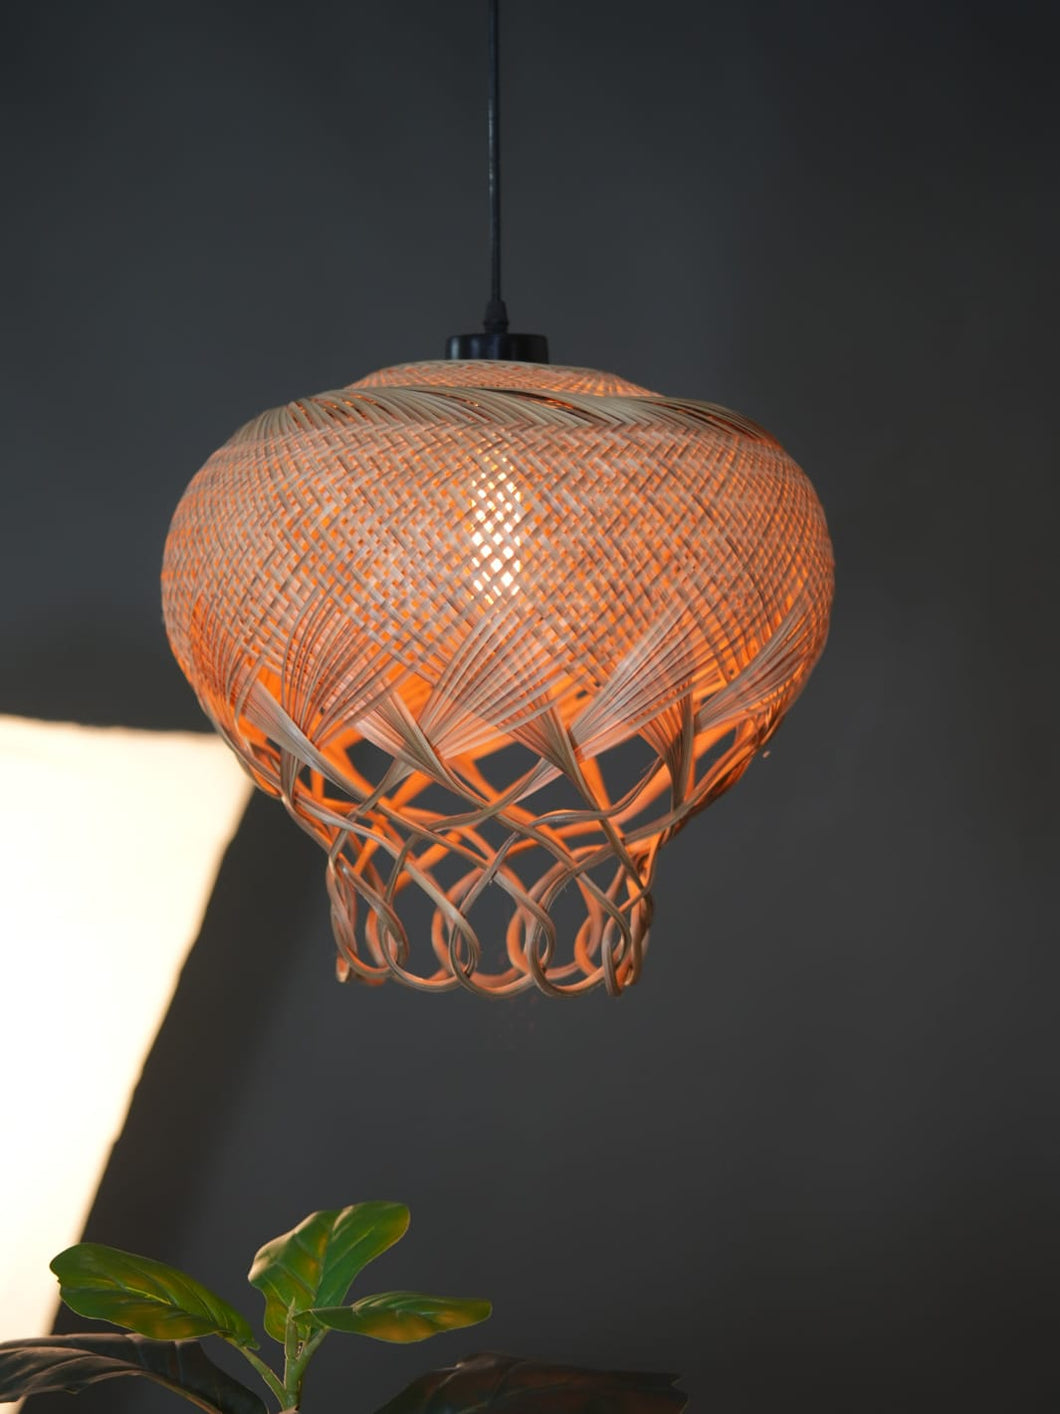 Jelly Regular - Unique handmade Woven Hanging Pendant Light, Natural/Bamboo Pendant Light for Home restaurants and offices.(Size: 14